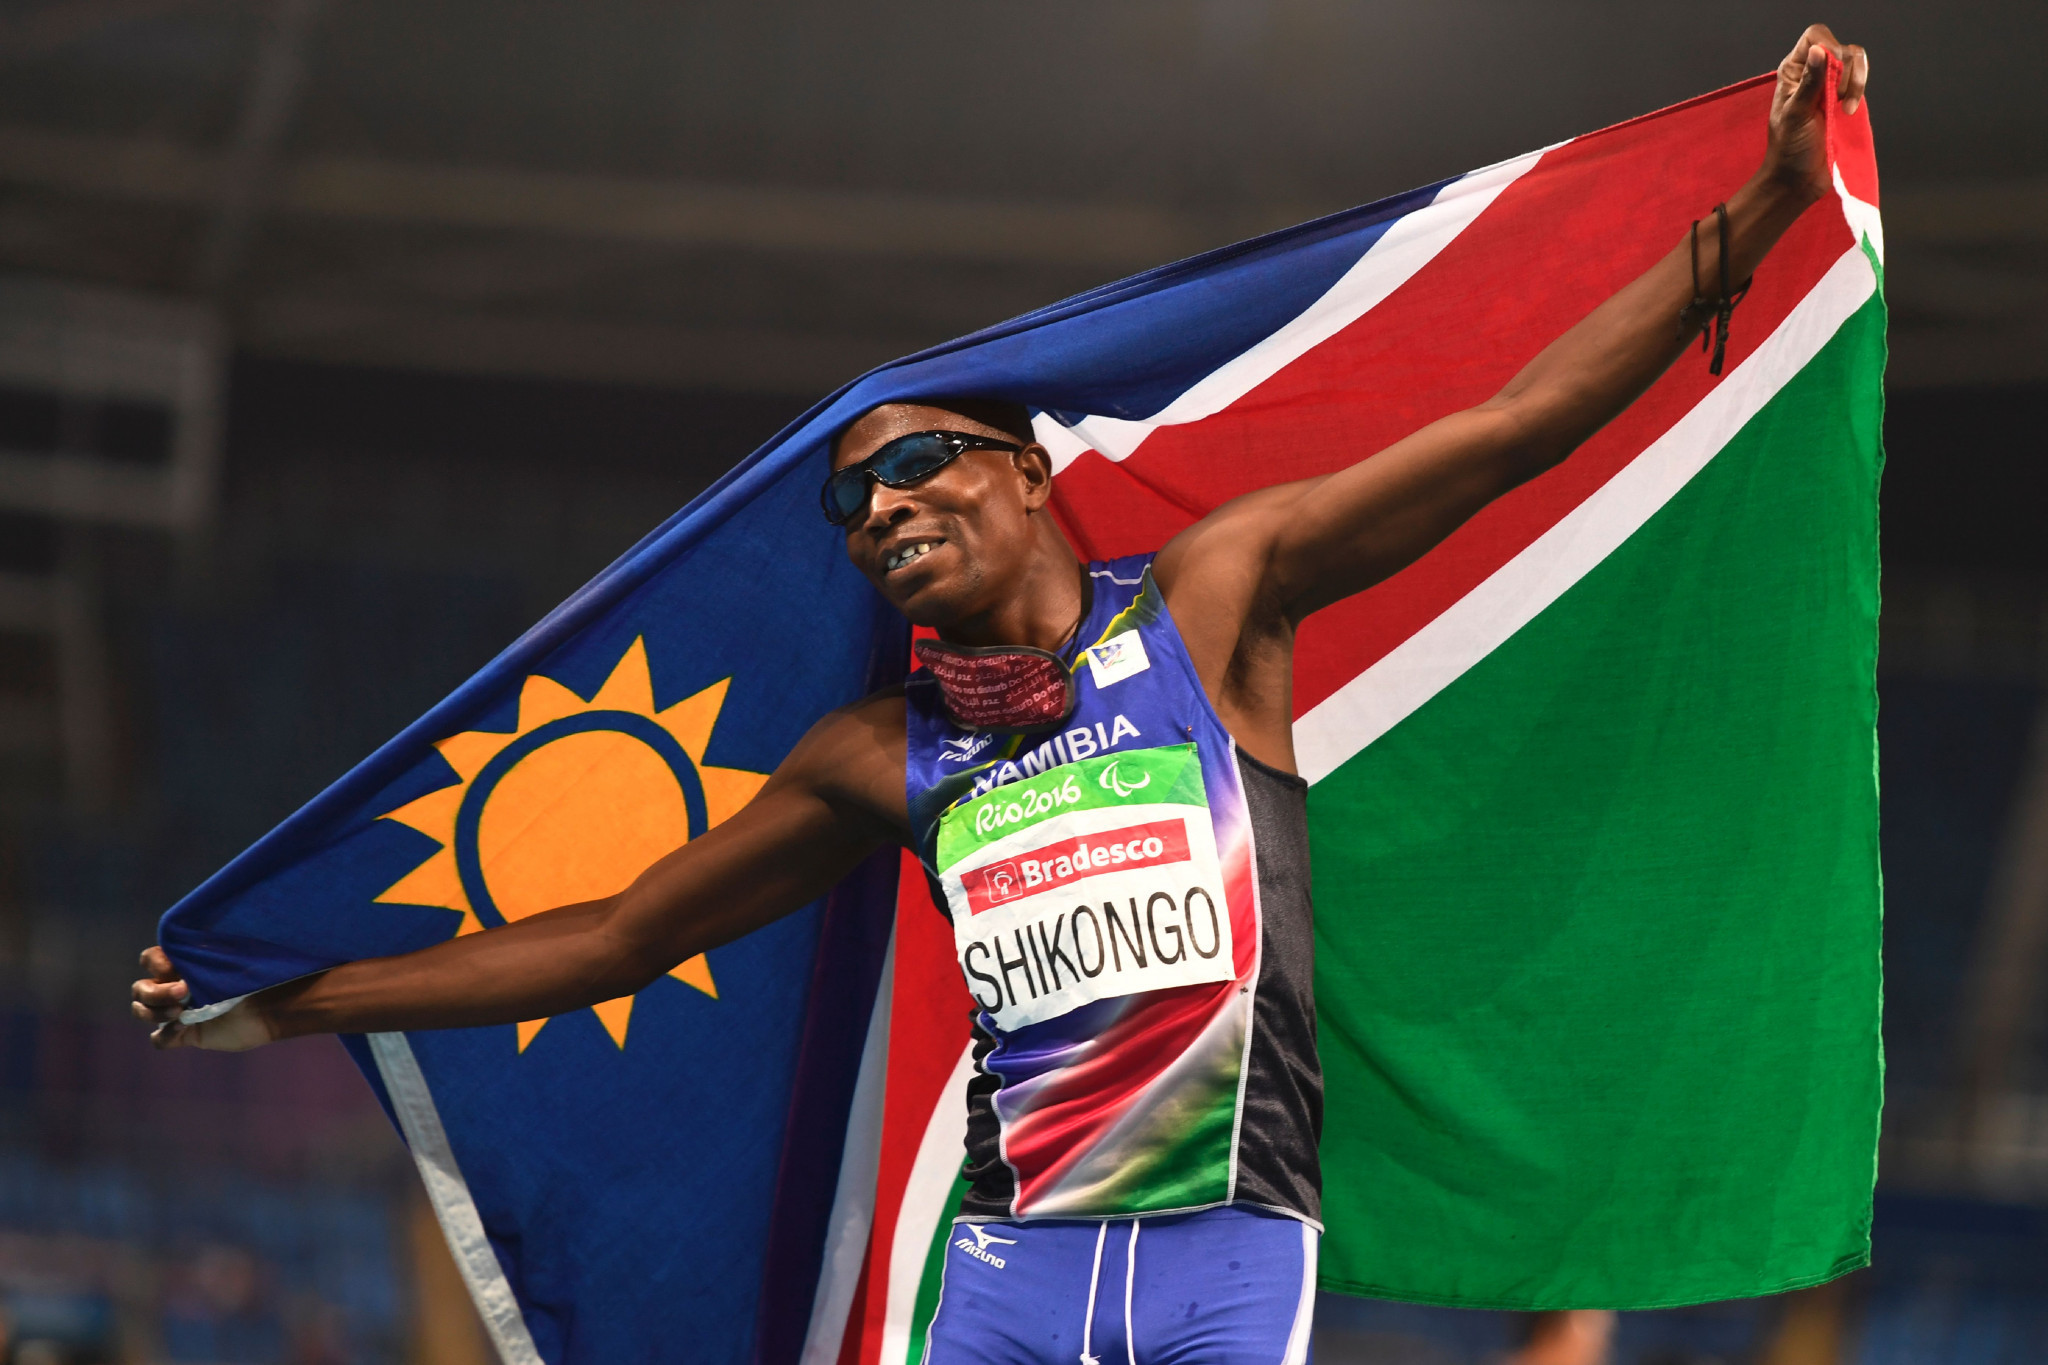 Namibia is among the sub-Saharan African countries set for free-to-air coverage of next year's Paralympics ©Getty Images